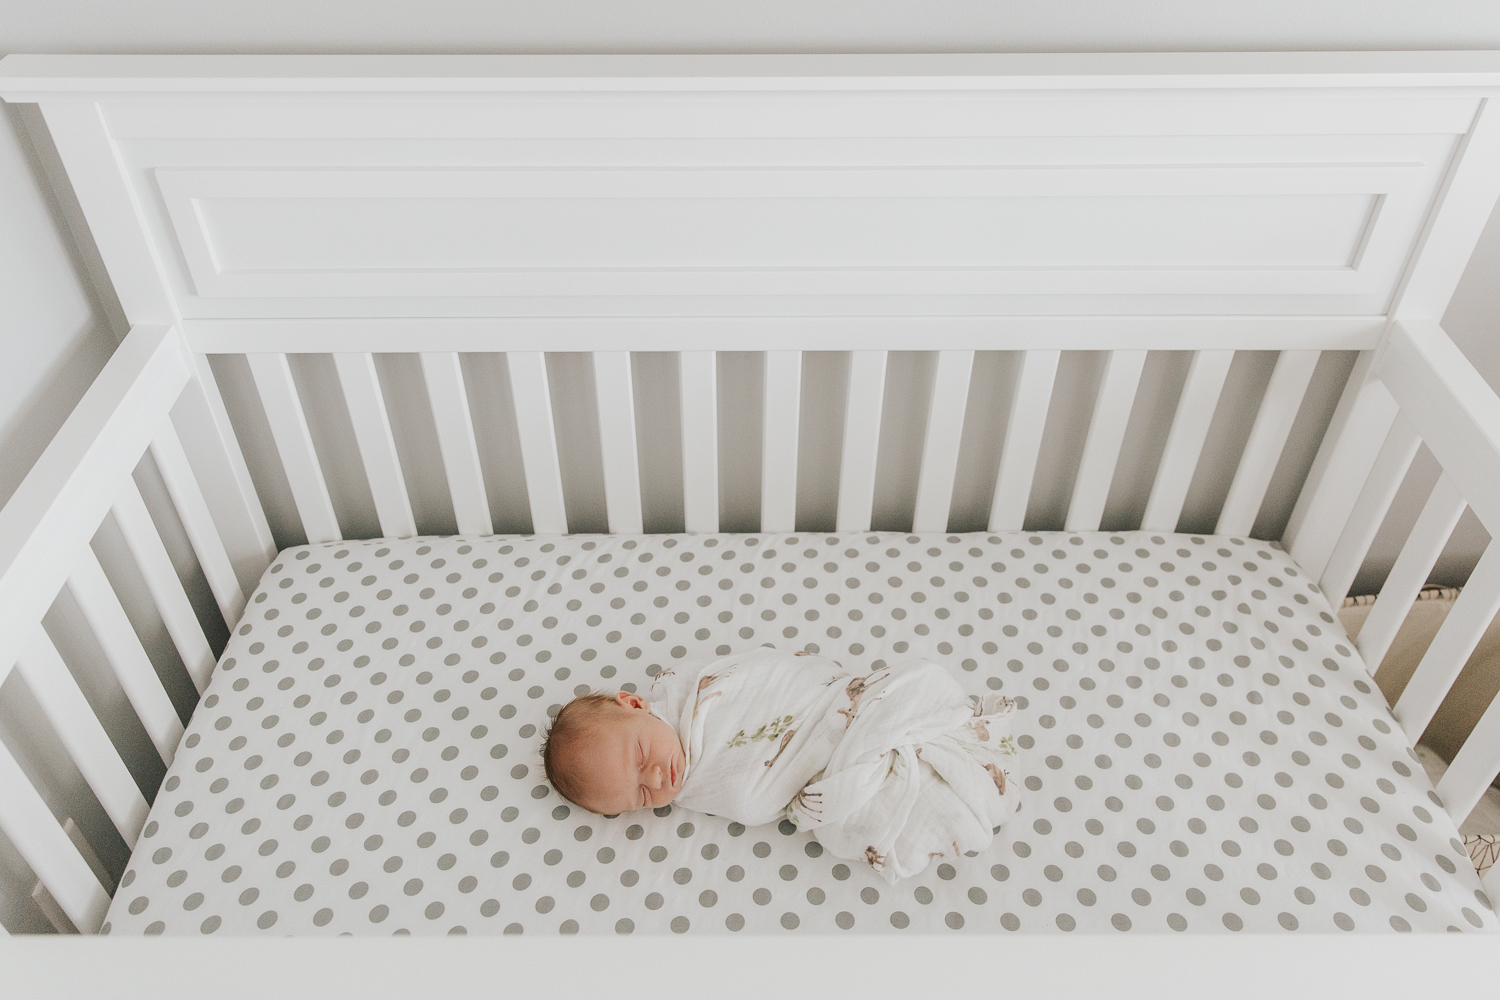 3 week old baby boy with red hair wrapped in swaddle and lying in crib with grey and white polka dot sheets, shot from above - Stouffville Lifestyle Photos